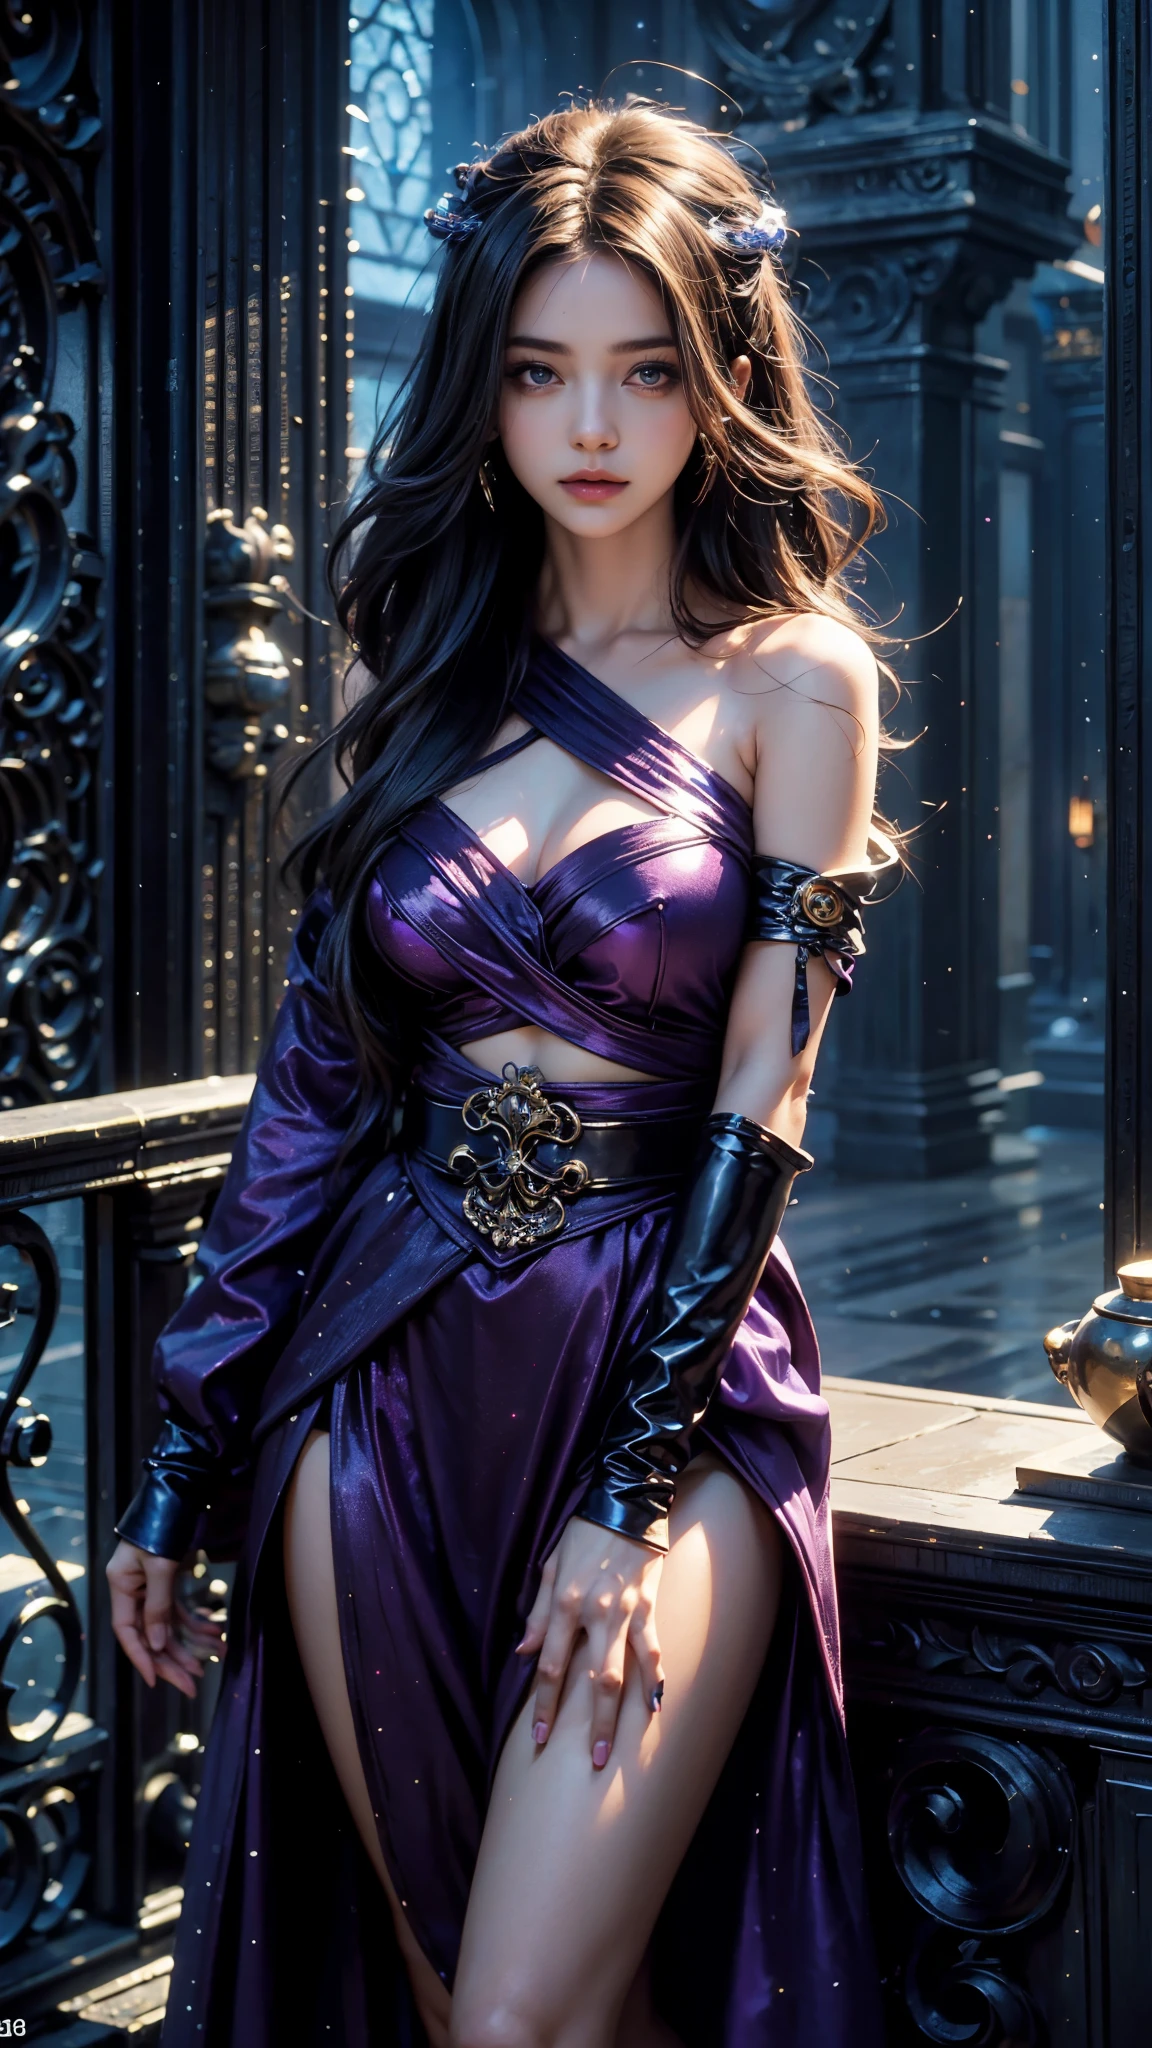 4k, UHD, masterpiece, Color Field painting, 1 girl, good face, ((detailed eyes)), very long hair, impressive hairstyle, perfect brasts, fantasy cosplay, purple cosplay, bare waist, night city, building, lamps, depth of field, reflection light, sparkle, chromatic aberration